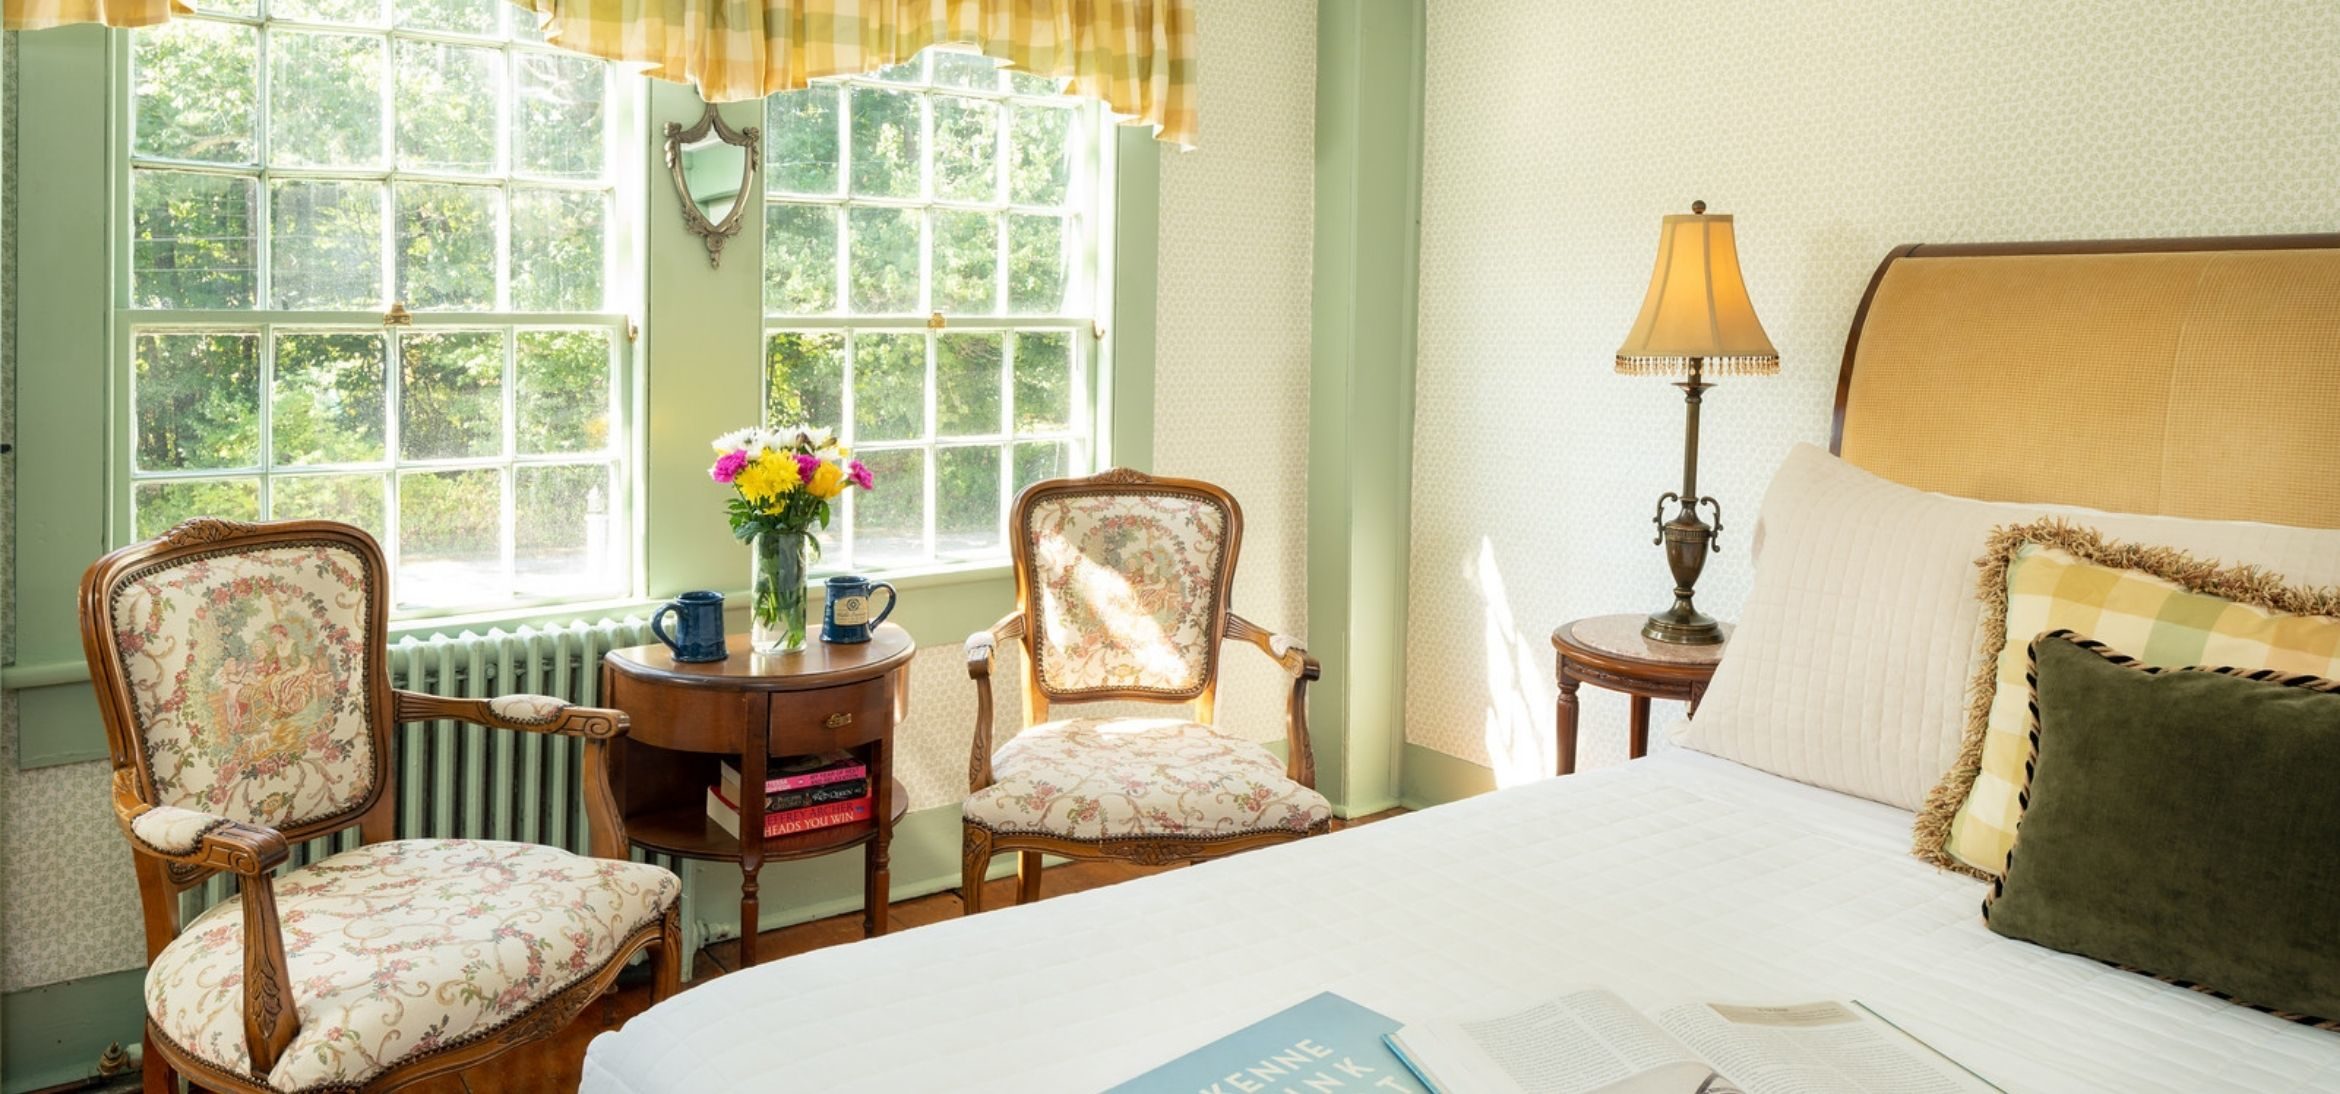 Lyman Room bed and sitting area at our Kennebunkport bed and breakfast